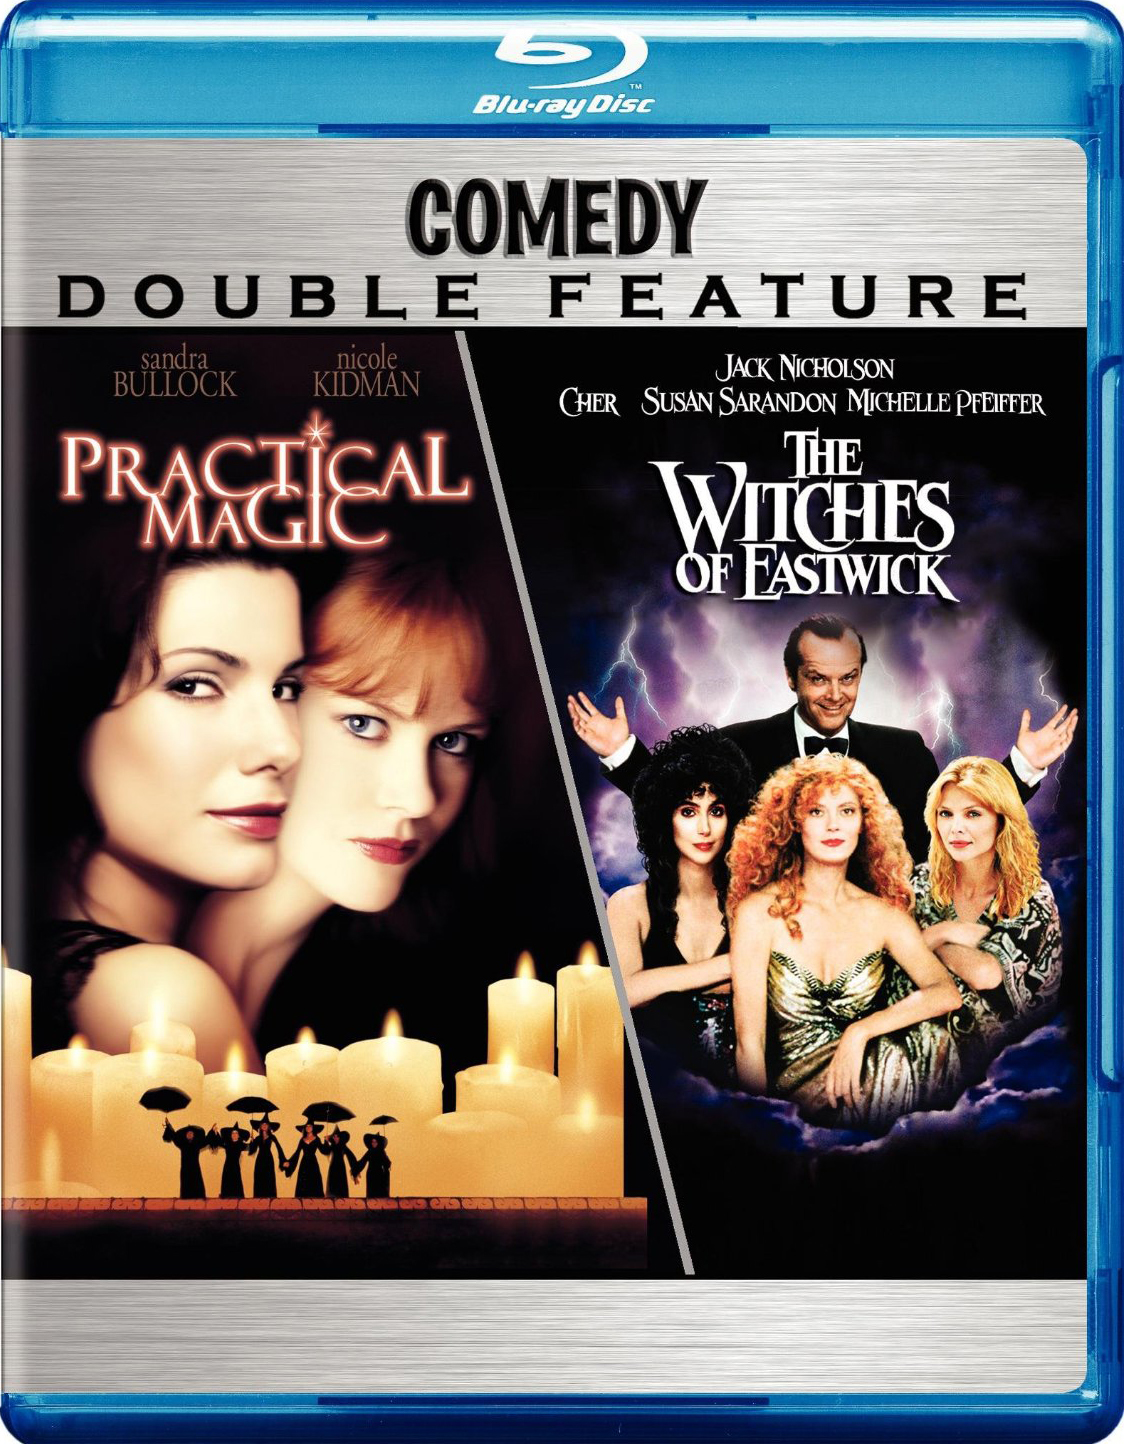 Comedy Double Feature